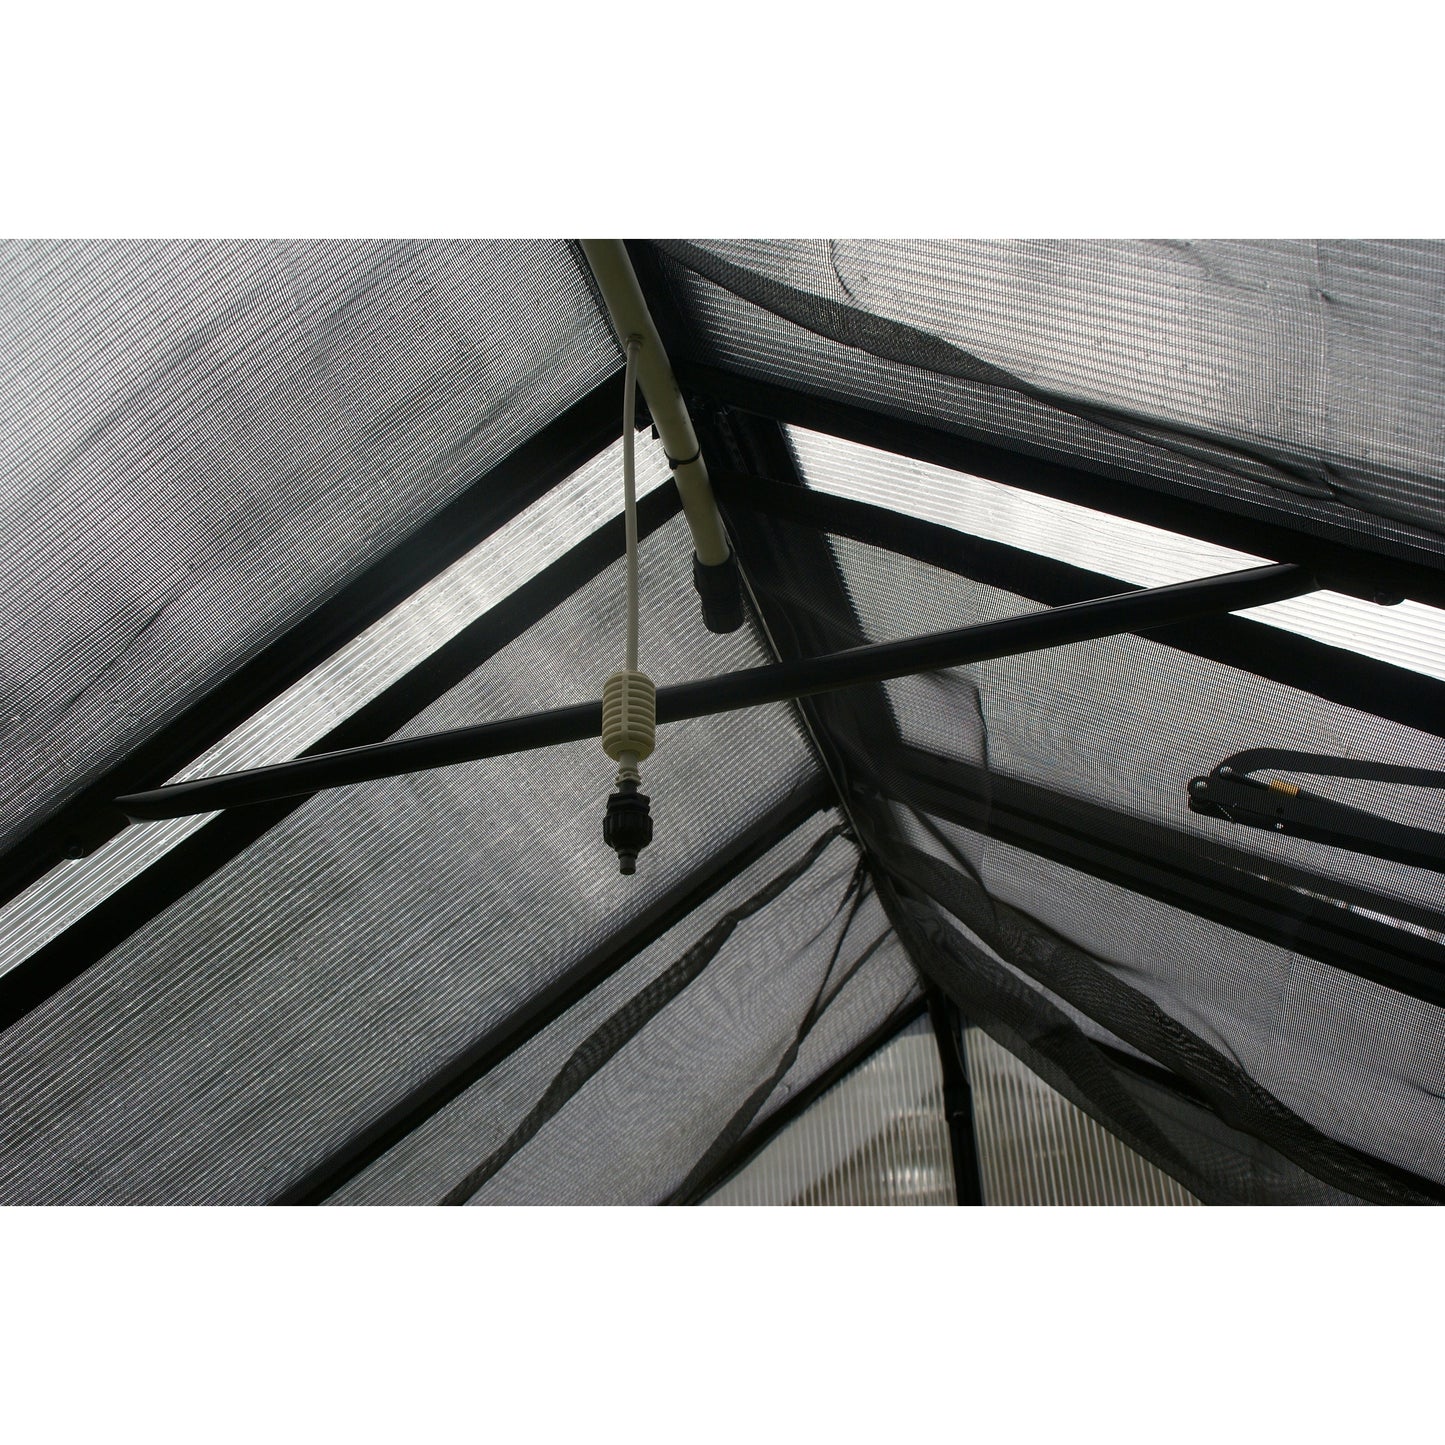 Mont Growers Edition Greenhouse 8FTx 20FT - Black Finish MONT-20-BK-GROWERS